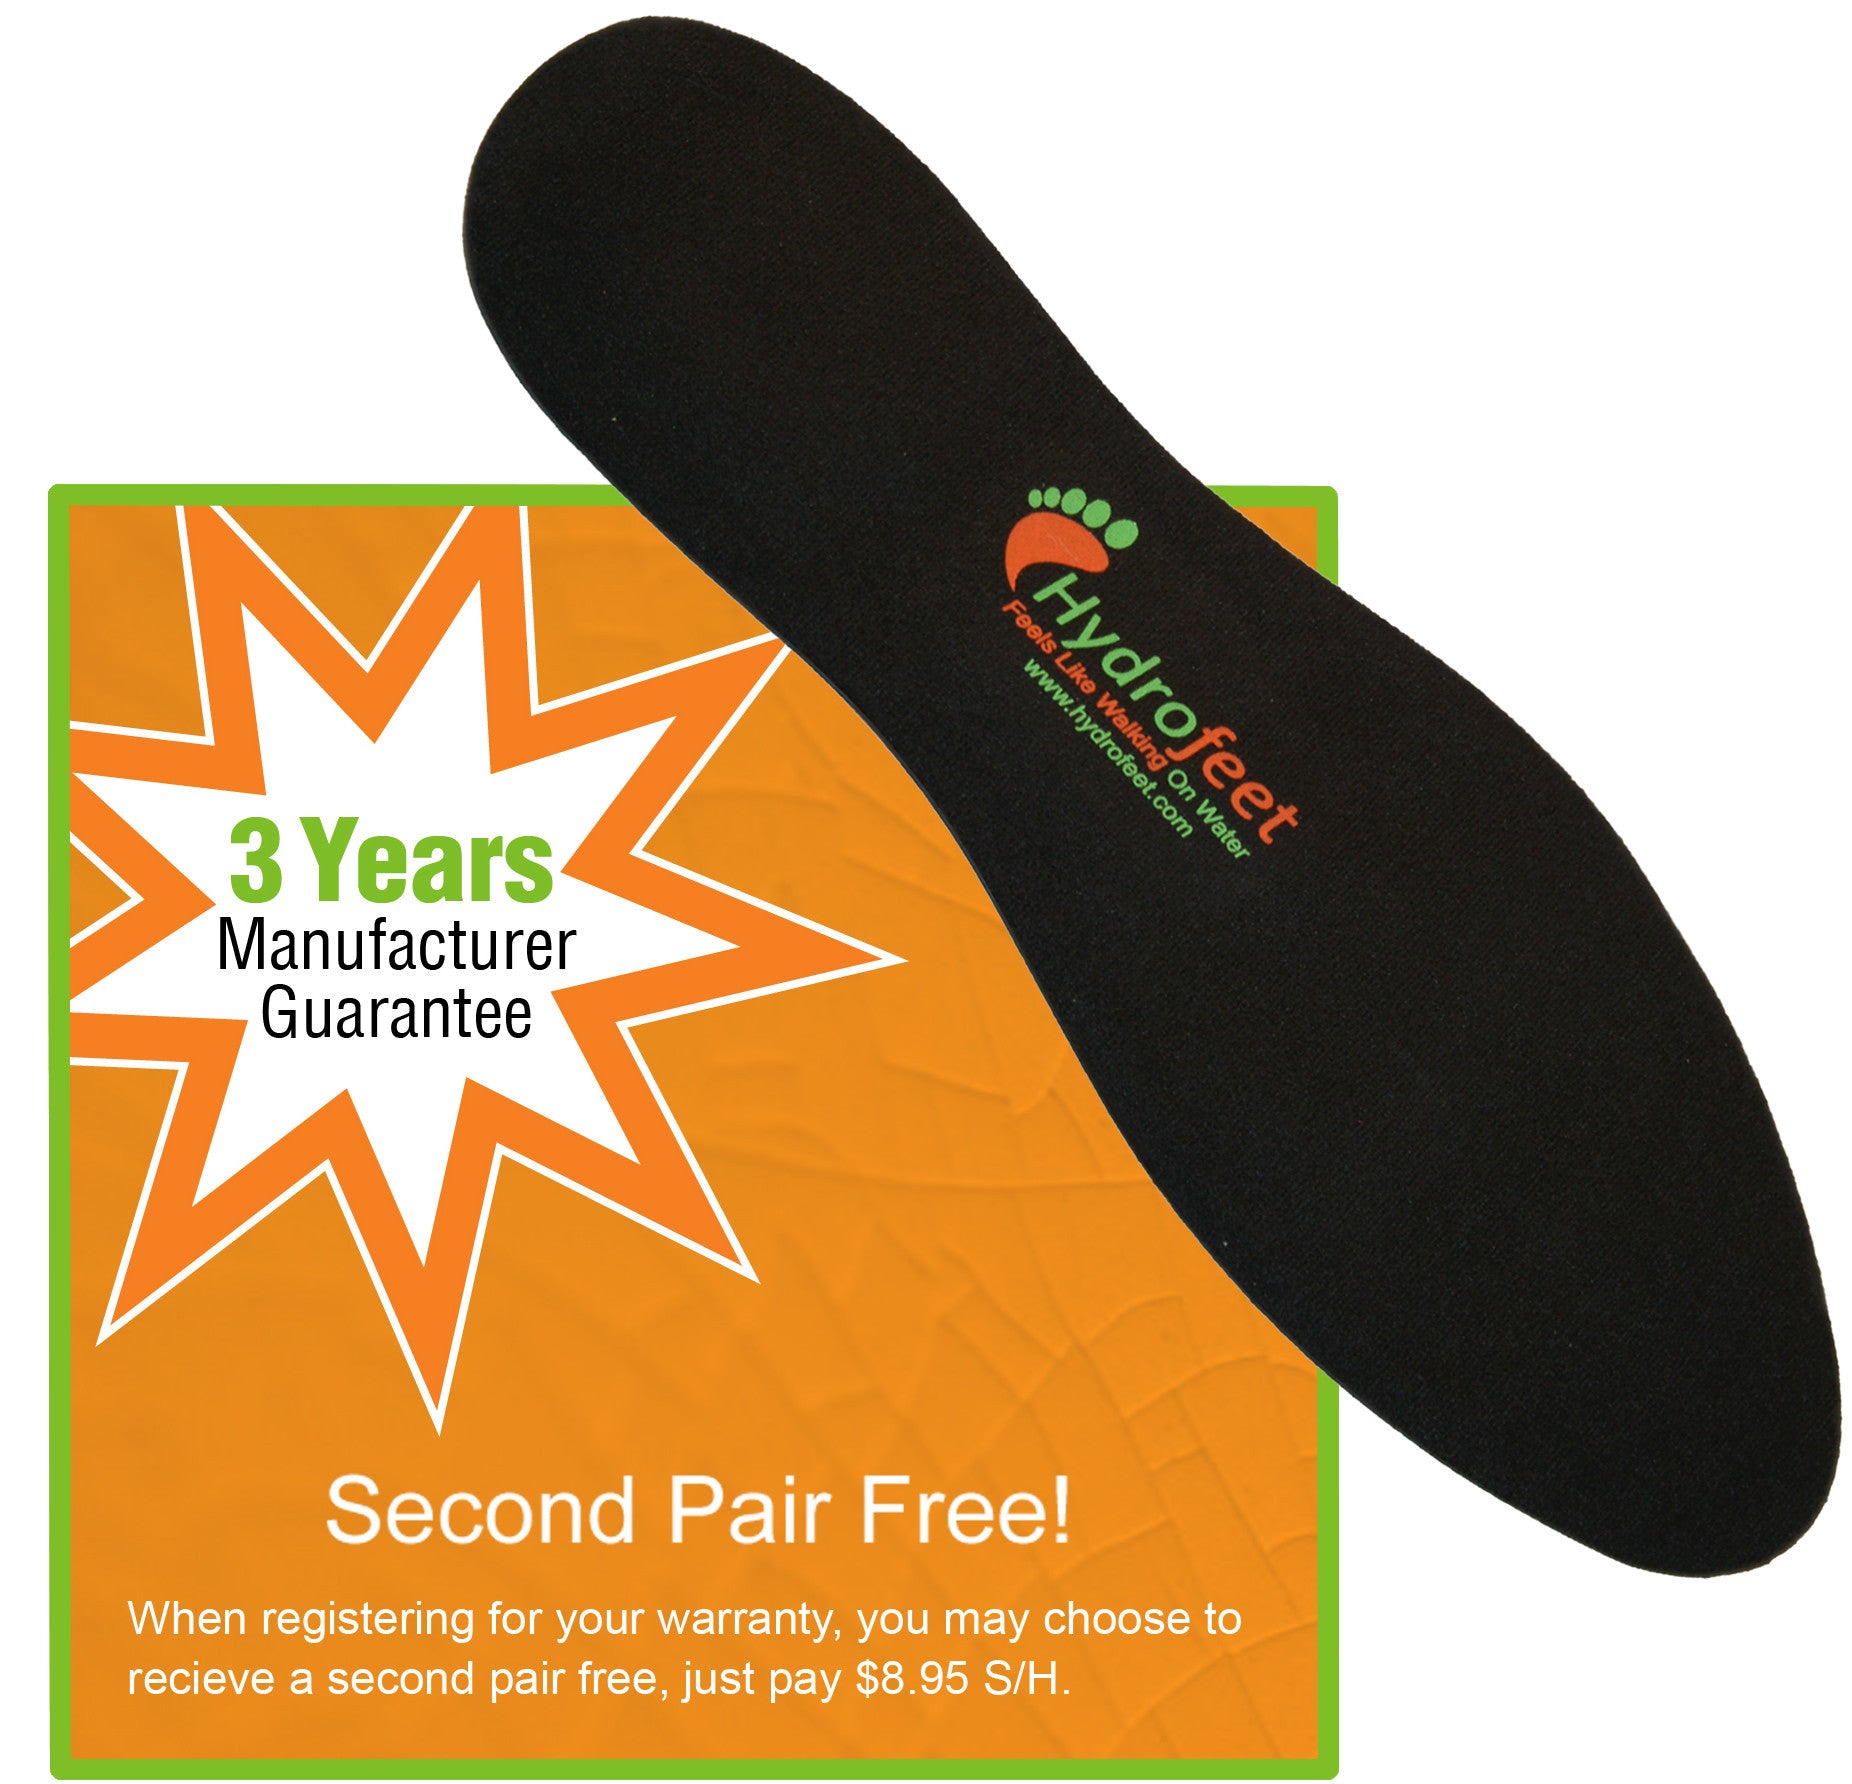 hydrofeet orthotic shoe insoles